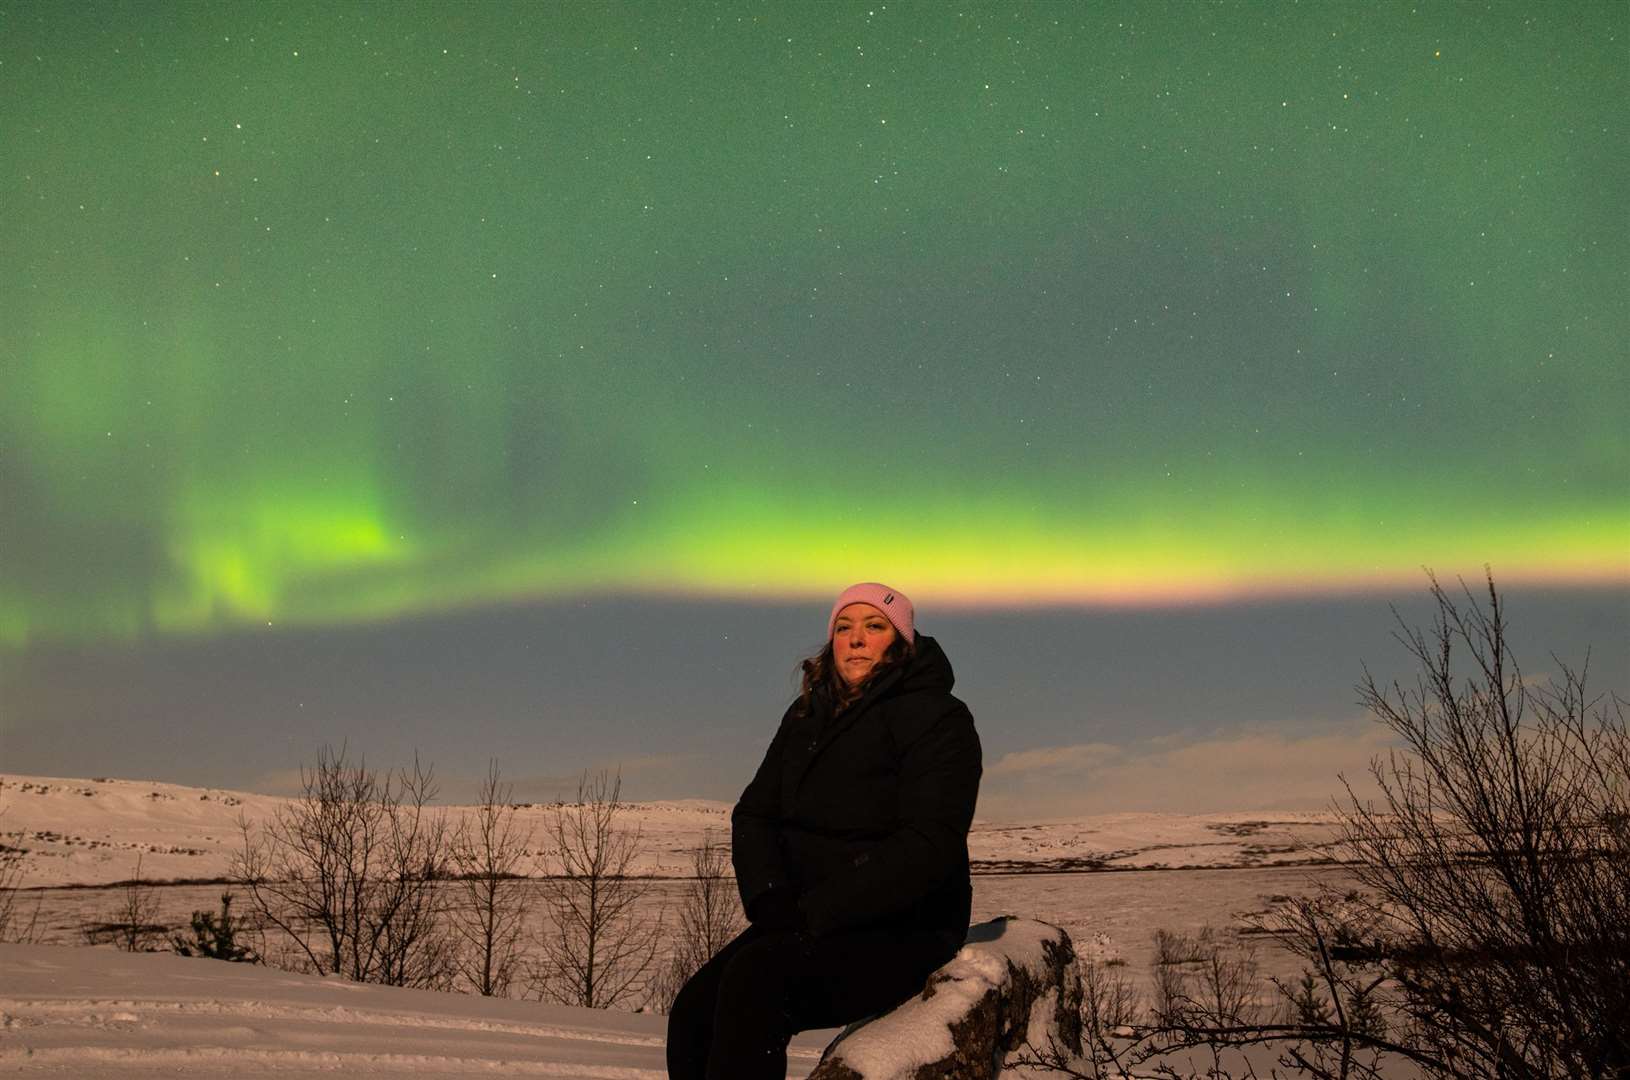 Rebecca Douglas on a trip to see the Northern Lights in Iceland. Picture: Rebecca Douglas Photography